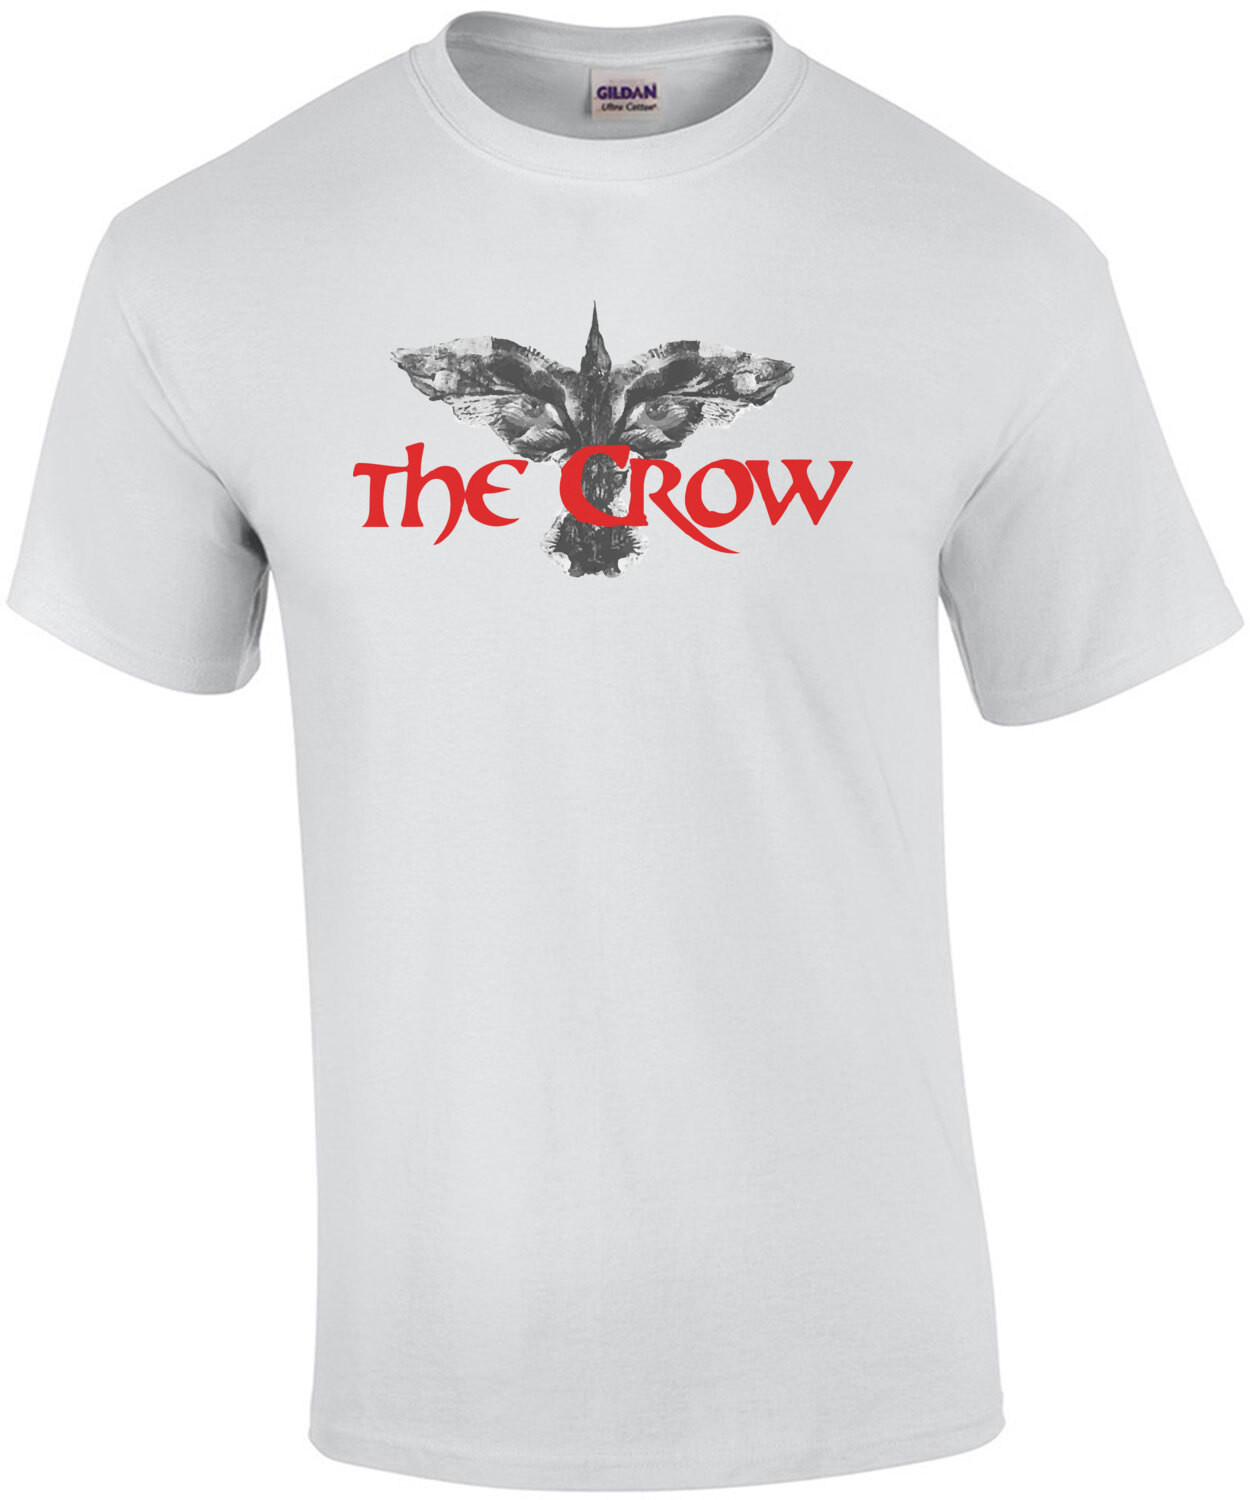 The Crow - 90's T-Shirt